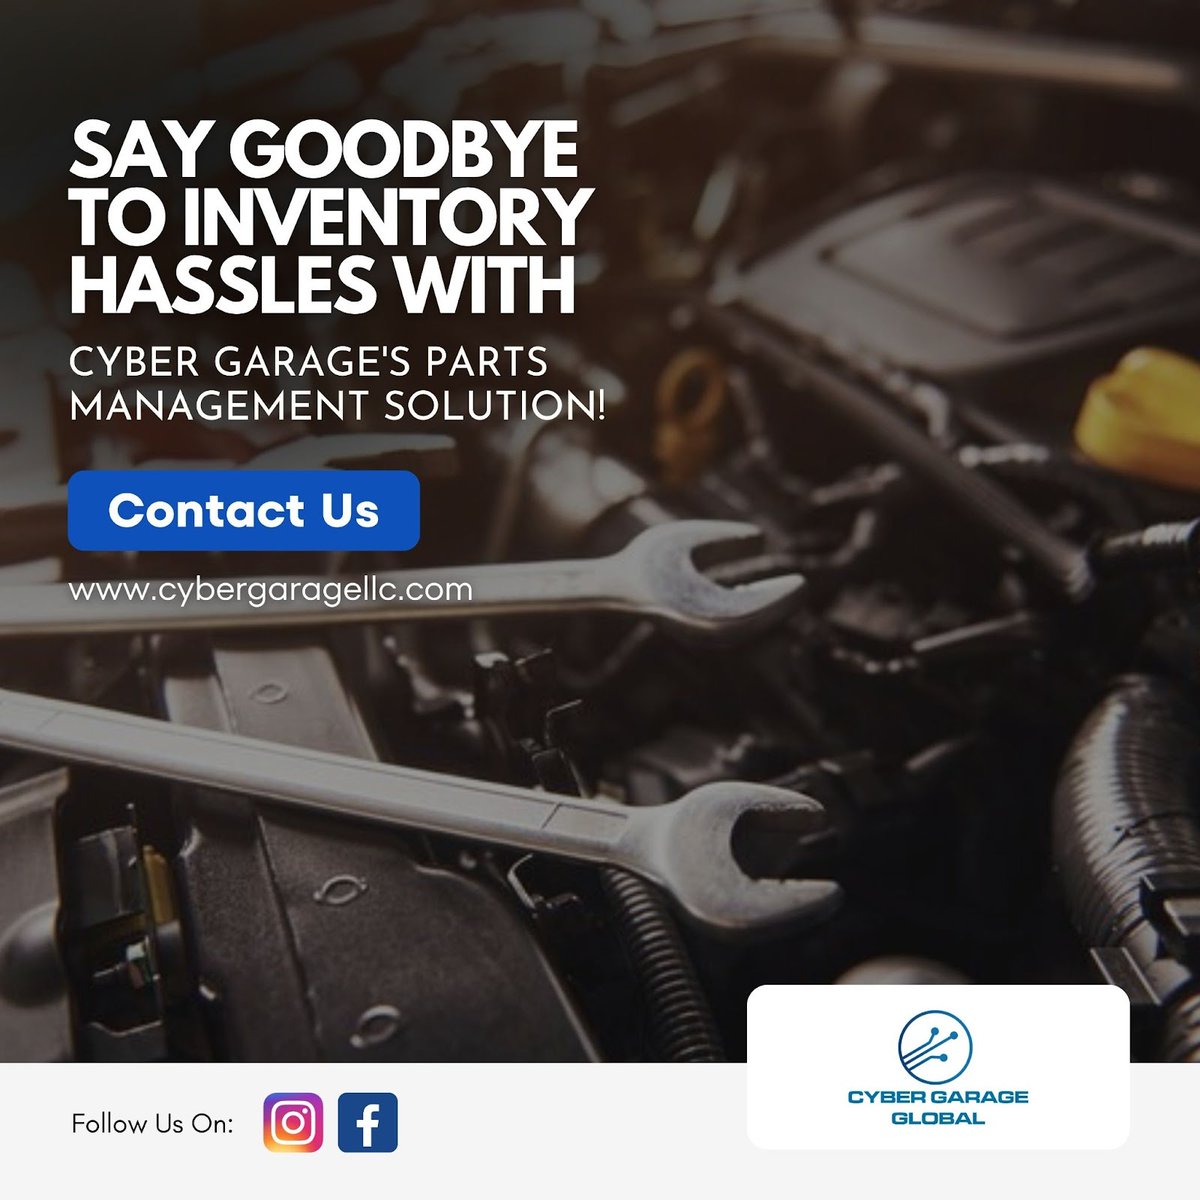 🛠🔍 Dealing with excess parts from suppliers that can't be returned? Our solution tracks your inventory.
-
Upgrade your shop and simplify your inventory management today! cybergaragellc.com
.
#PartsManagement #InventoryControl #AutoRepair #Efficiency #StreamlineOperations